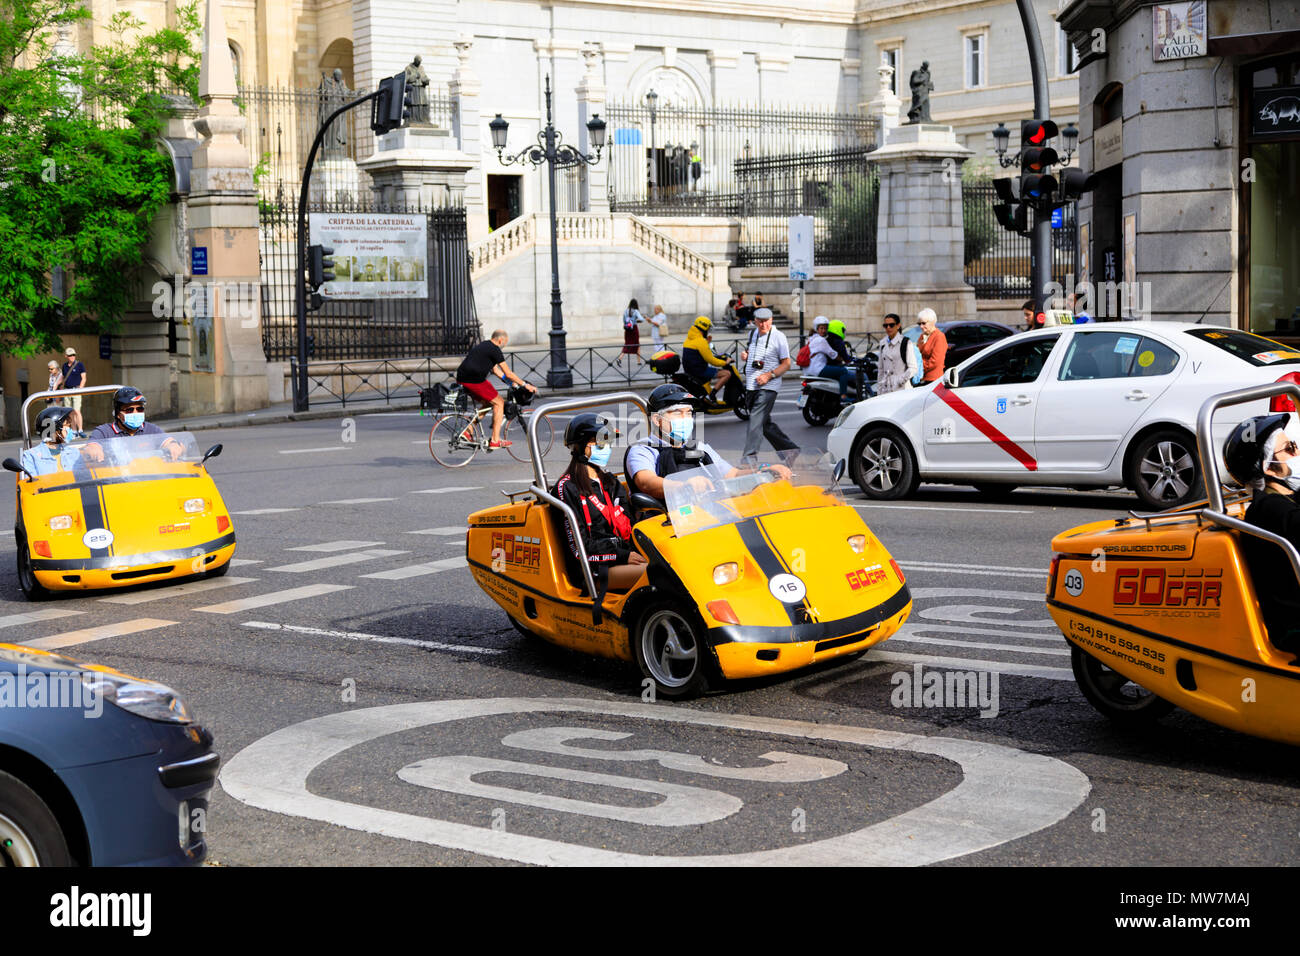 3 wheeled Gocars carrying Chinese tourists wearing smog masks on a tour of Madrid, Spain. May 2018 Stock Photo